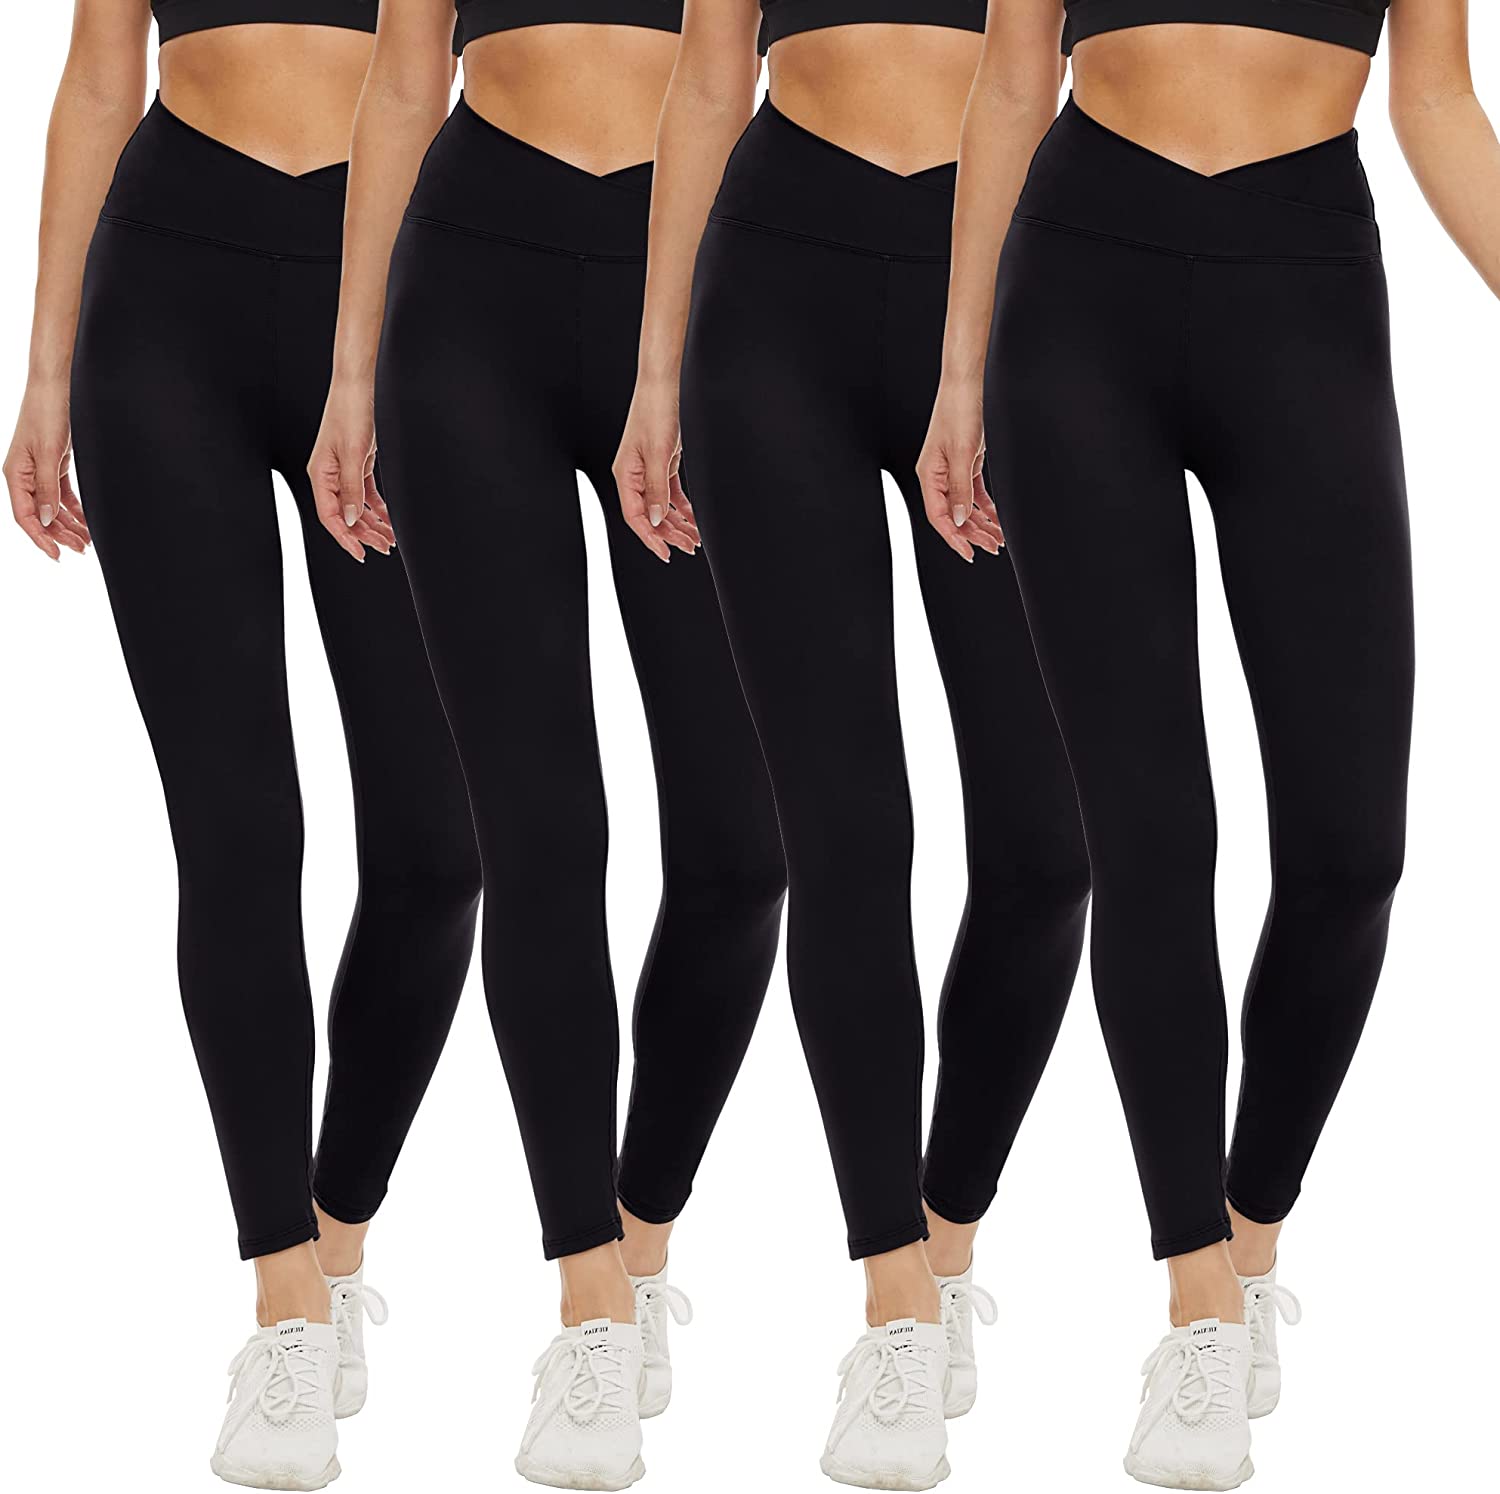 CAMPSNAIL 4 Pack High Waisted Leggings for Women- Soft Tummy Control